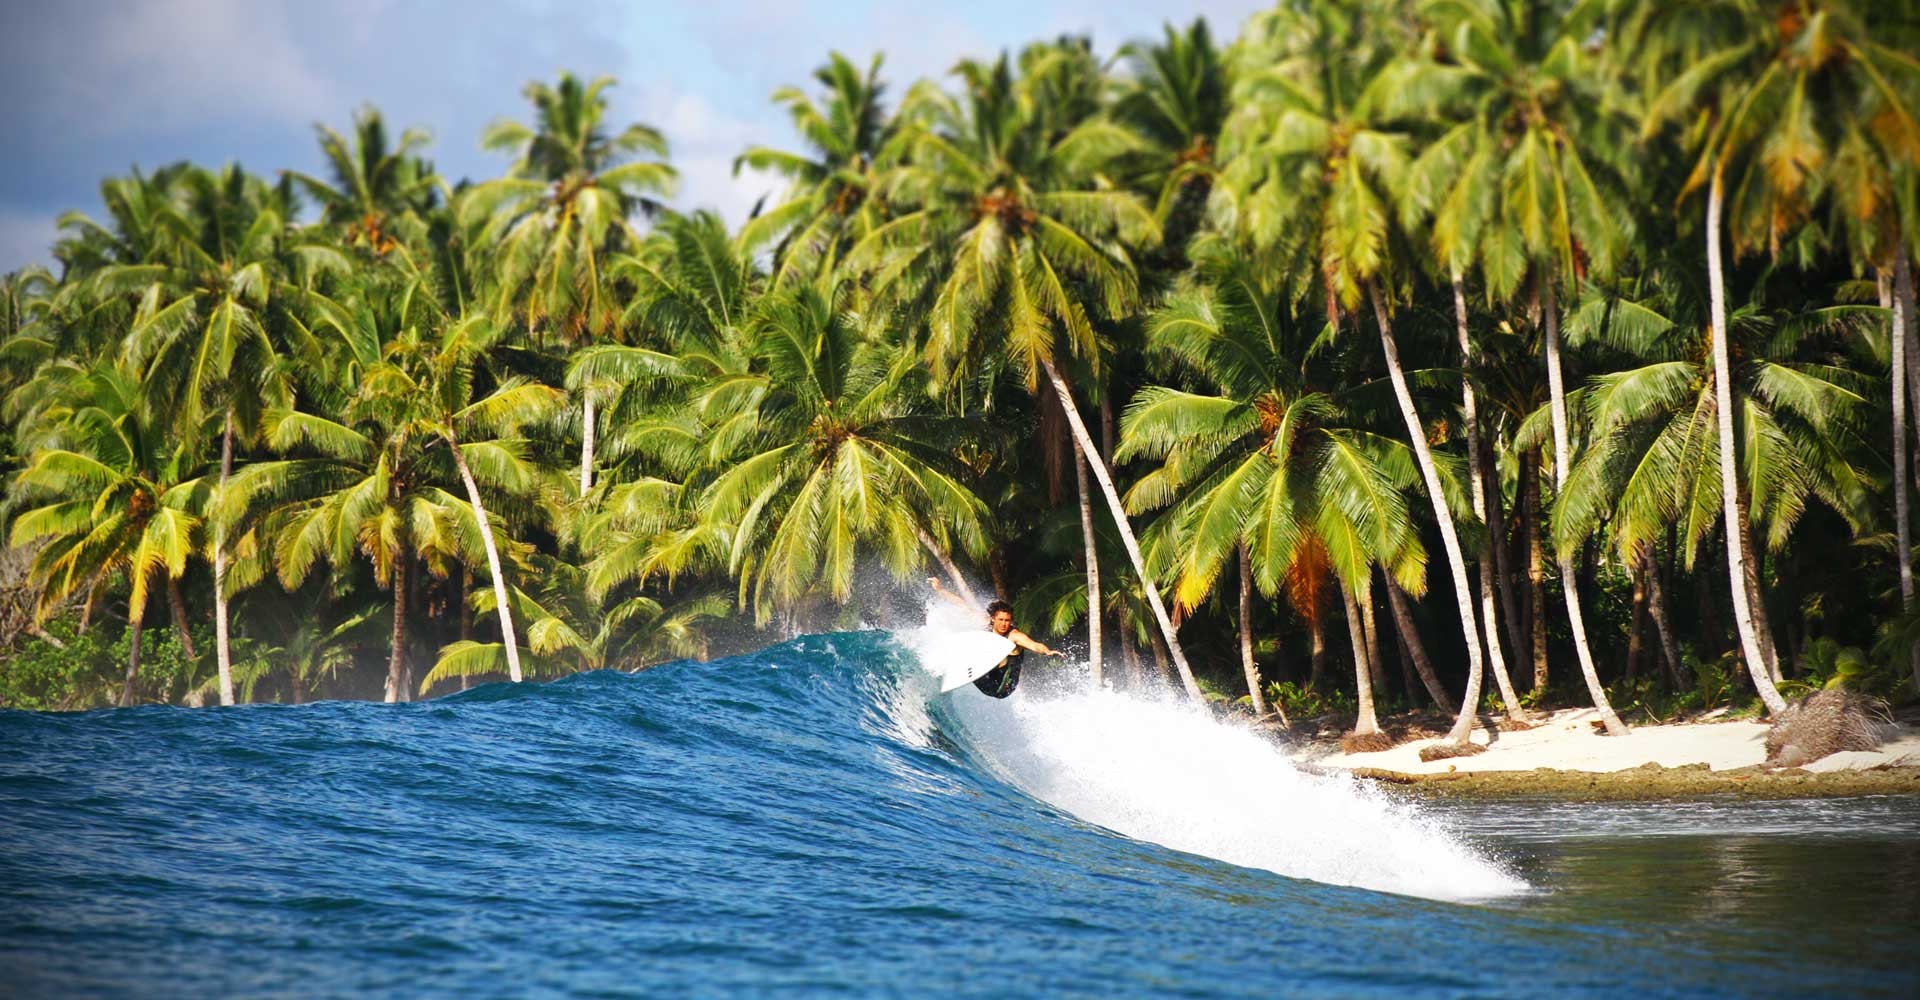 Surf trips to Maldives promise perfect waves with your custom surfboard.